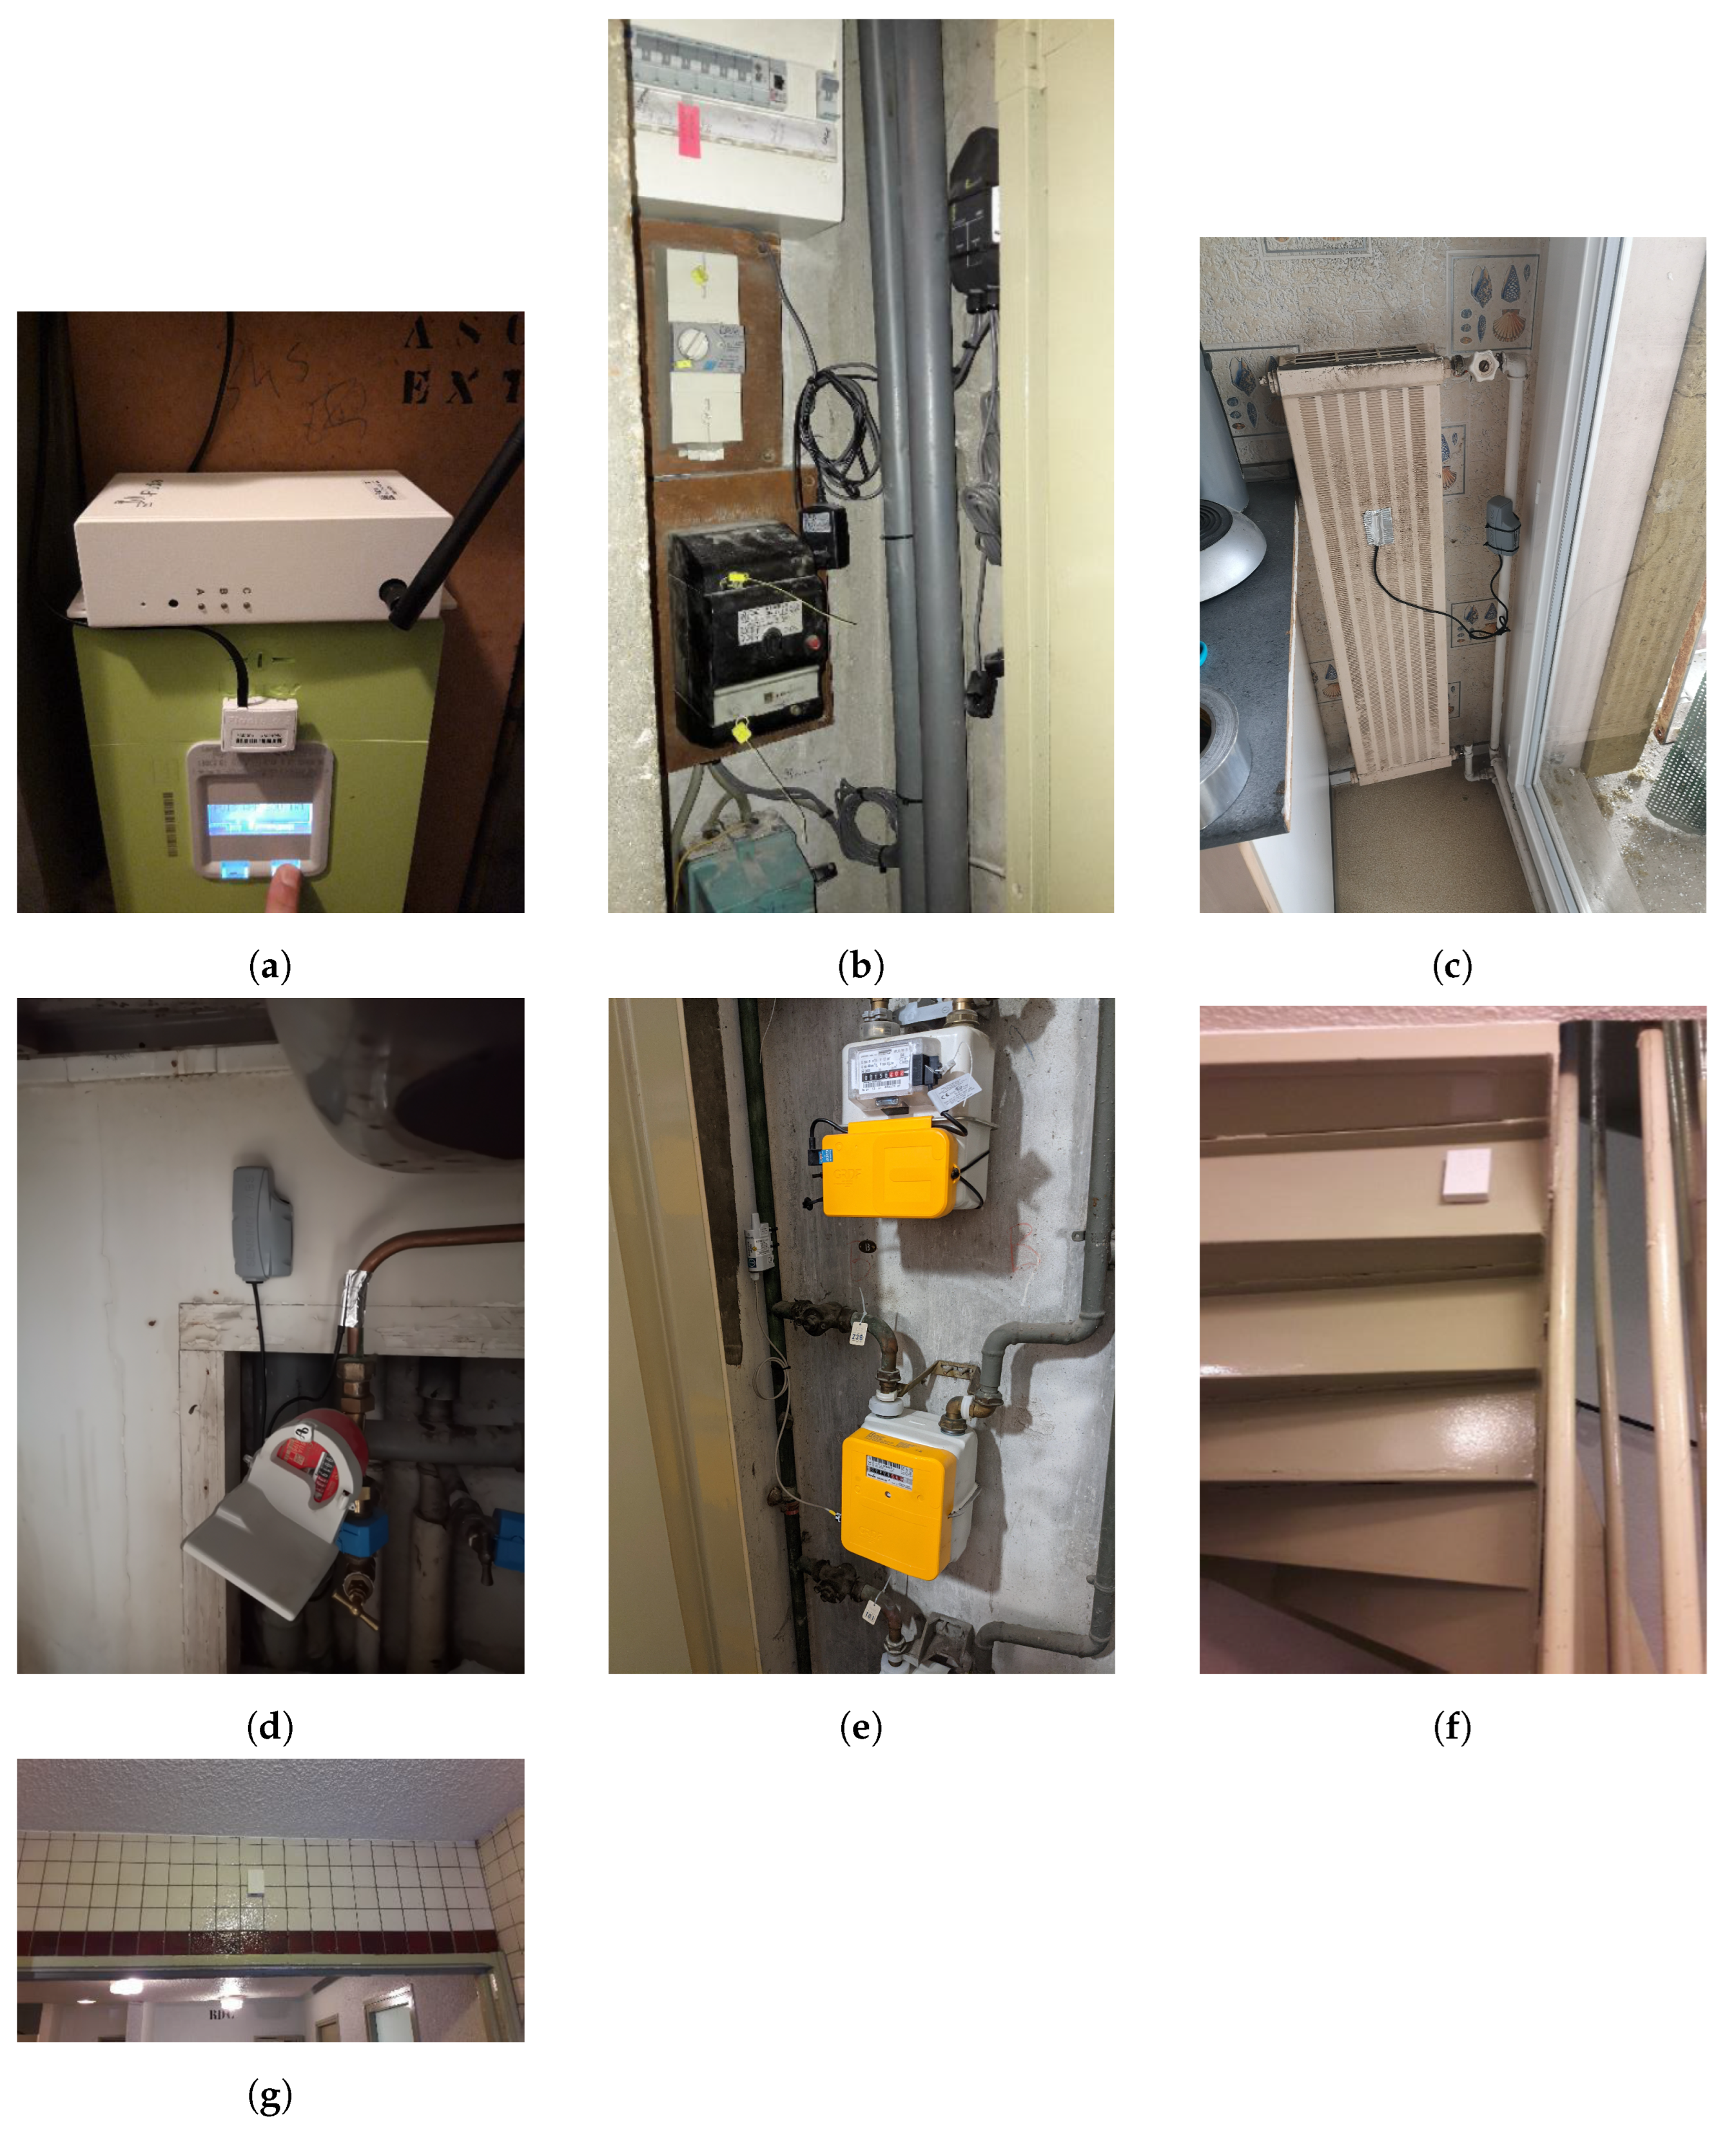 Sensors | Free Full-Text | A Wireless Sensor Network for Residential  Building Energy and Indoor Environmental Quality Monitoring: Design,  Instrumentation, Data Analysis and Feedback